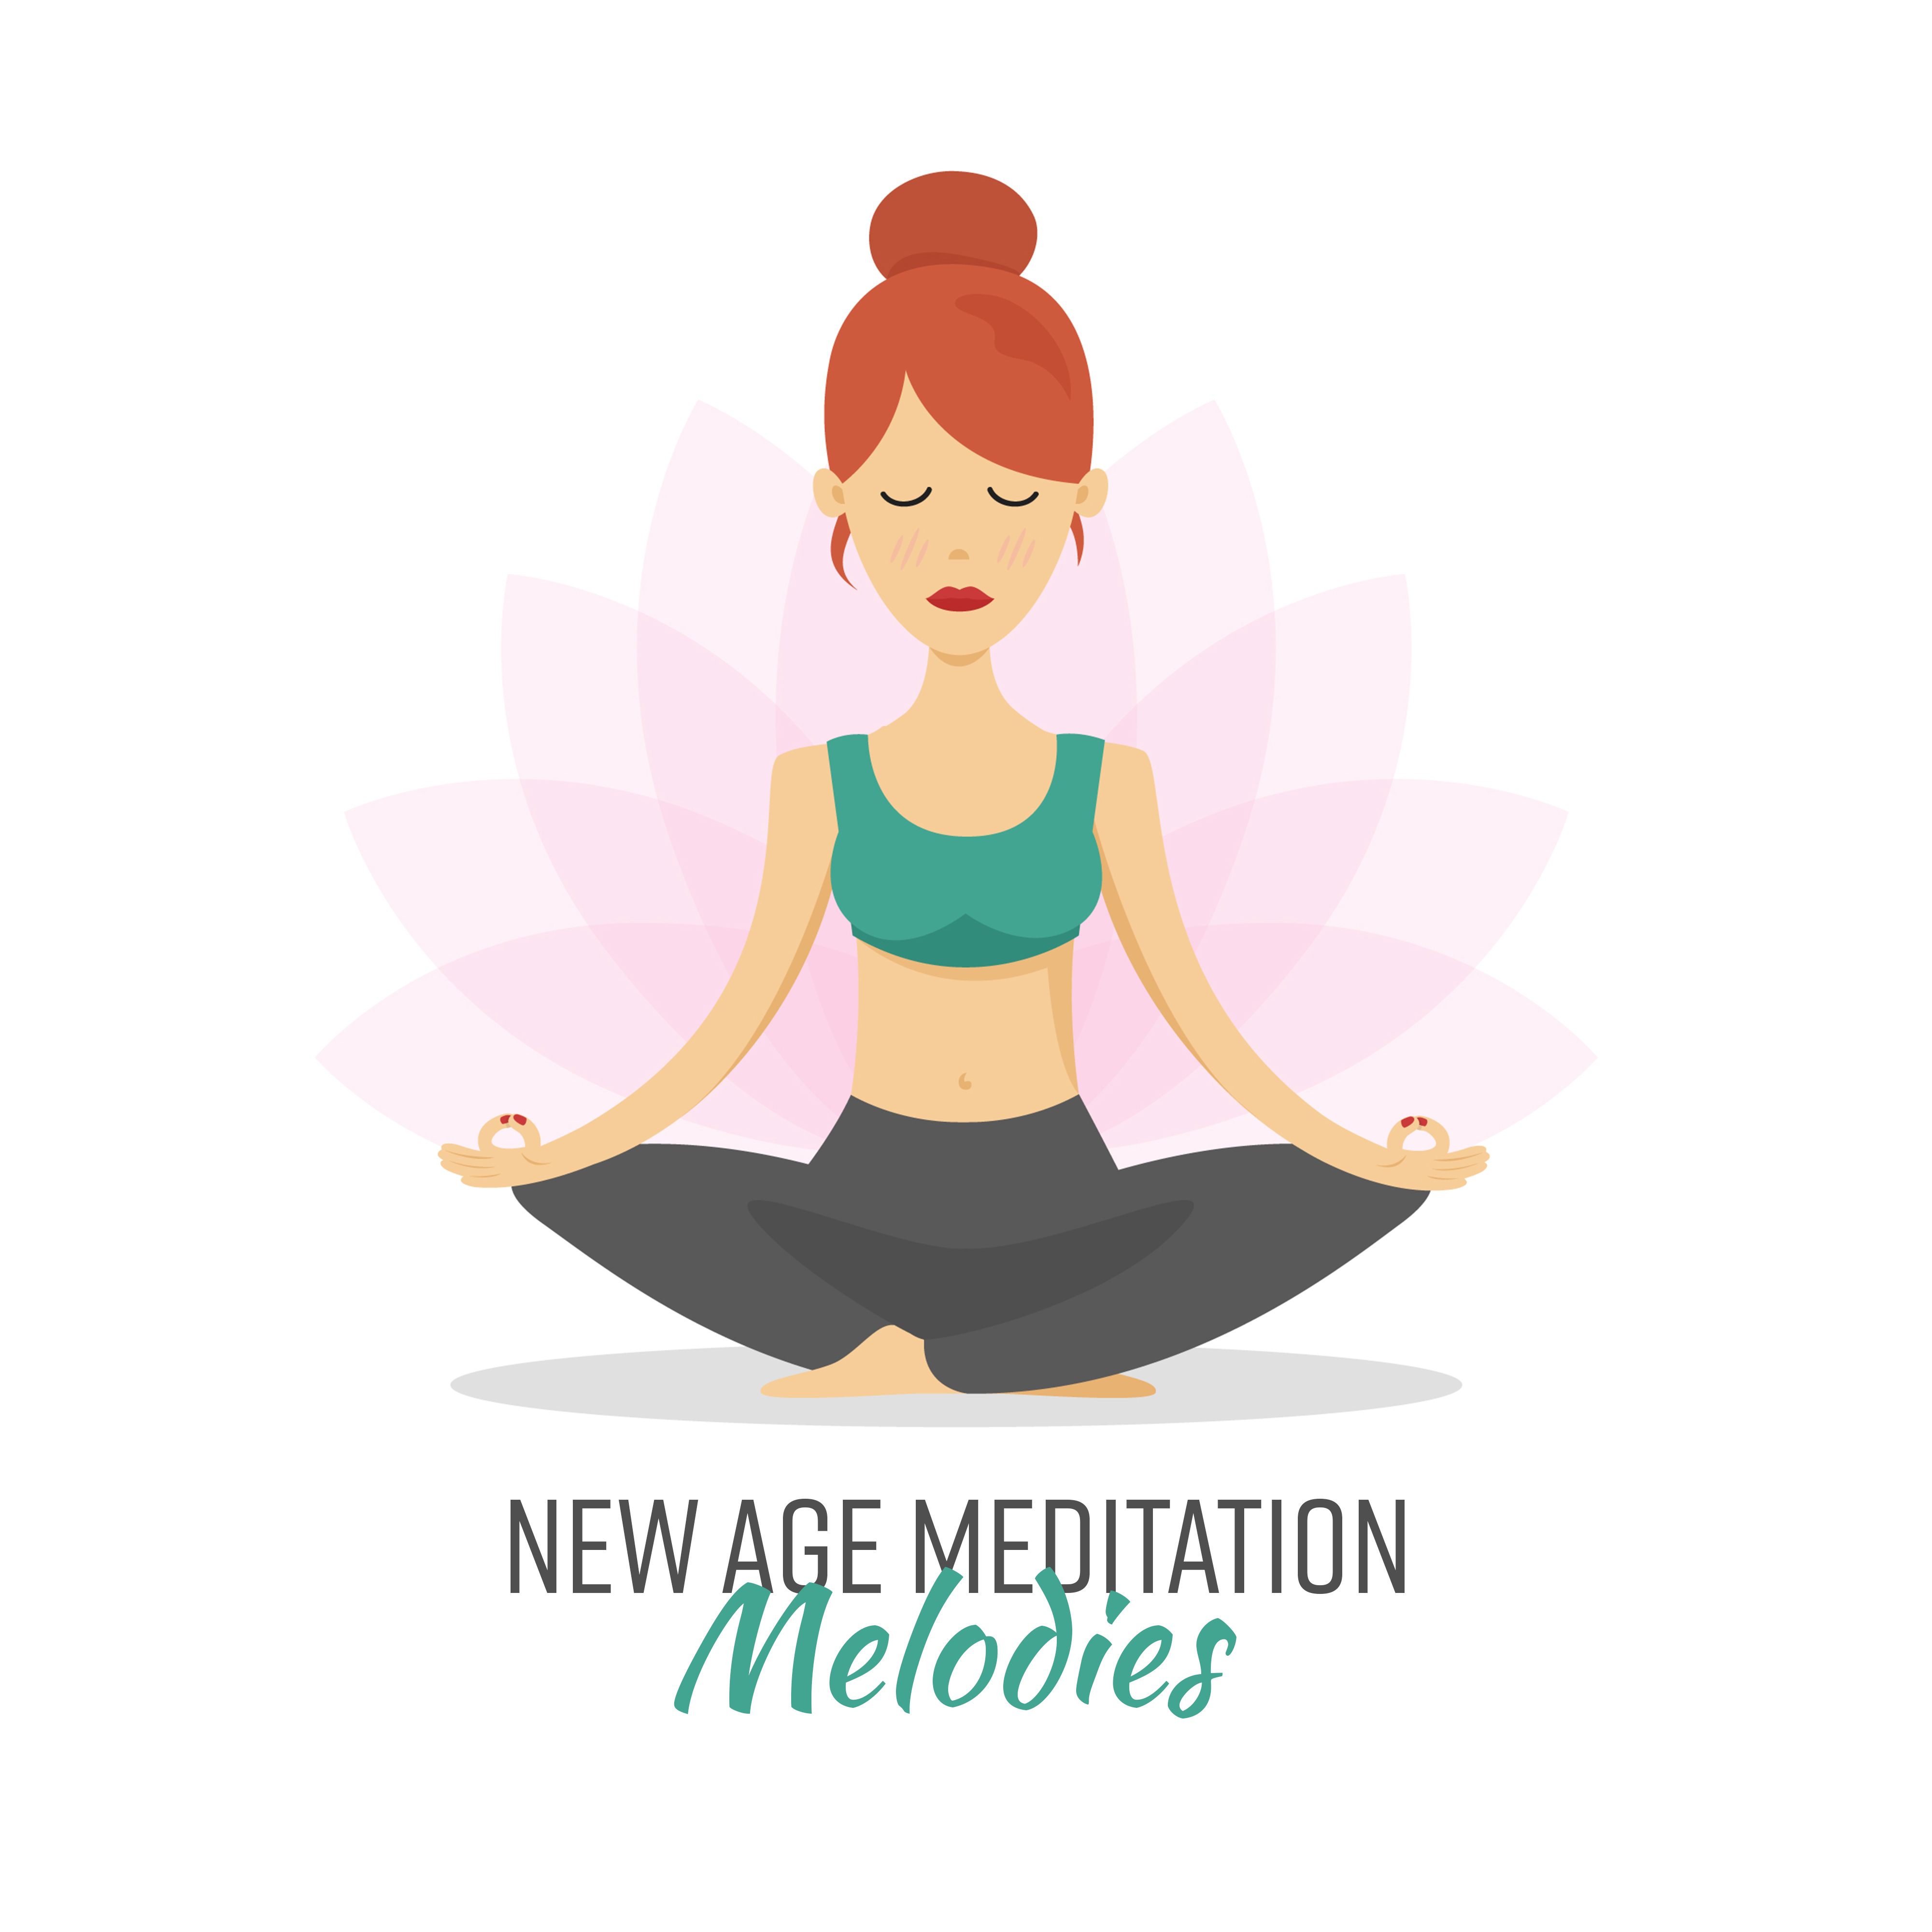 New Age Meditation Melodies